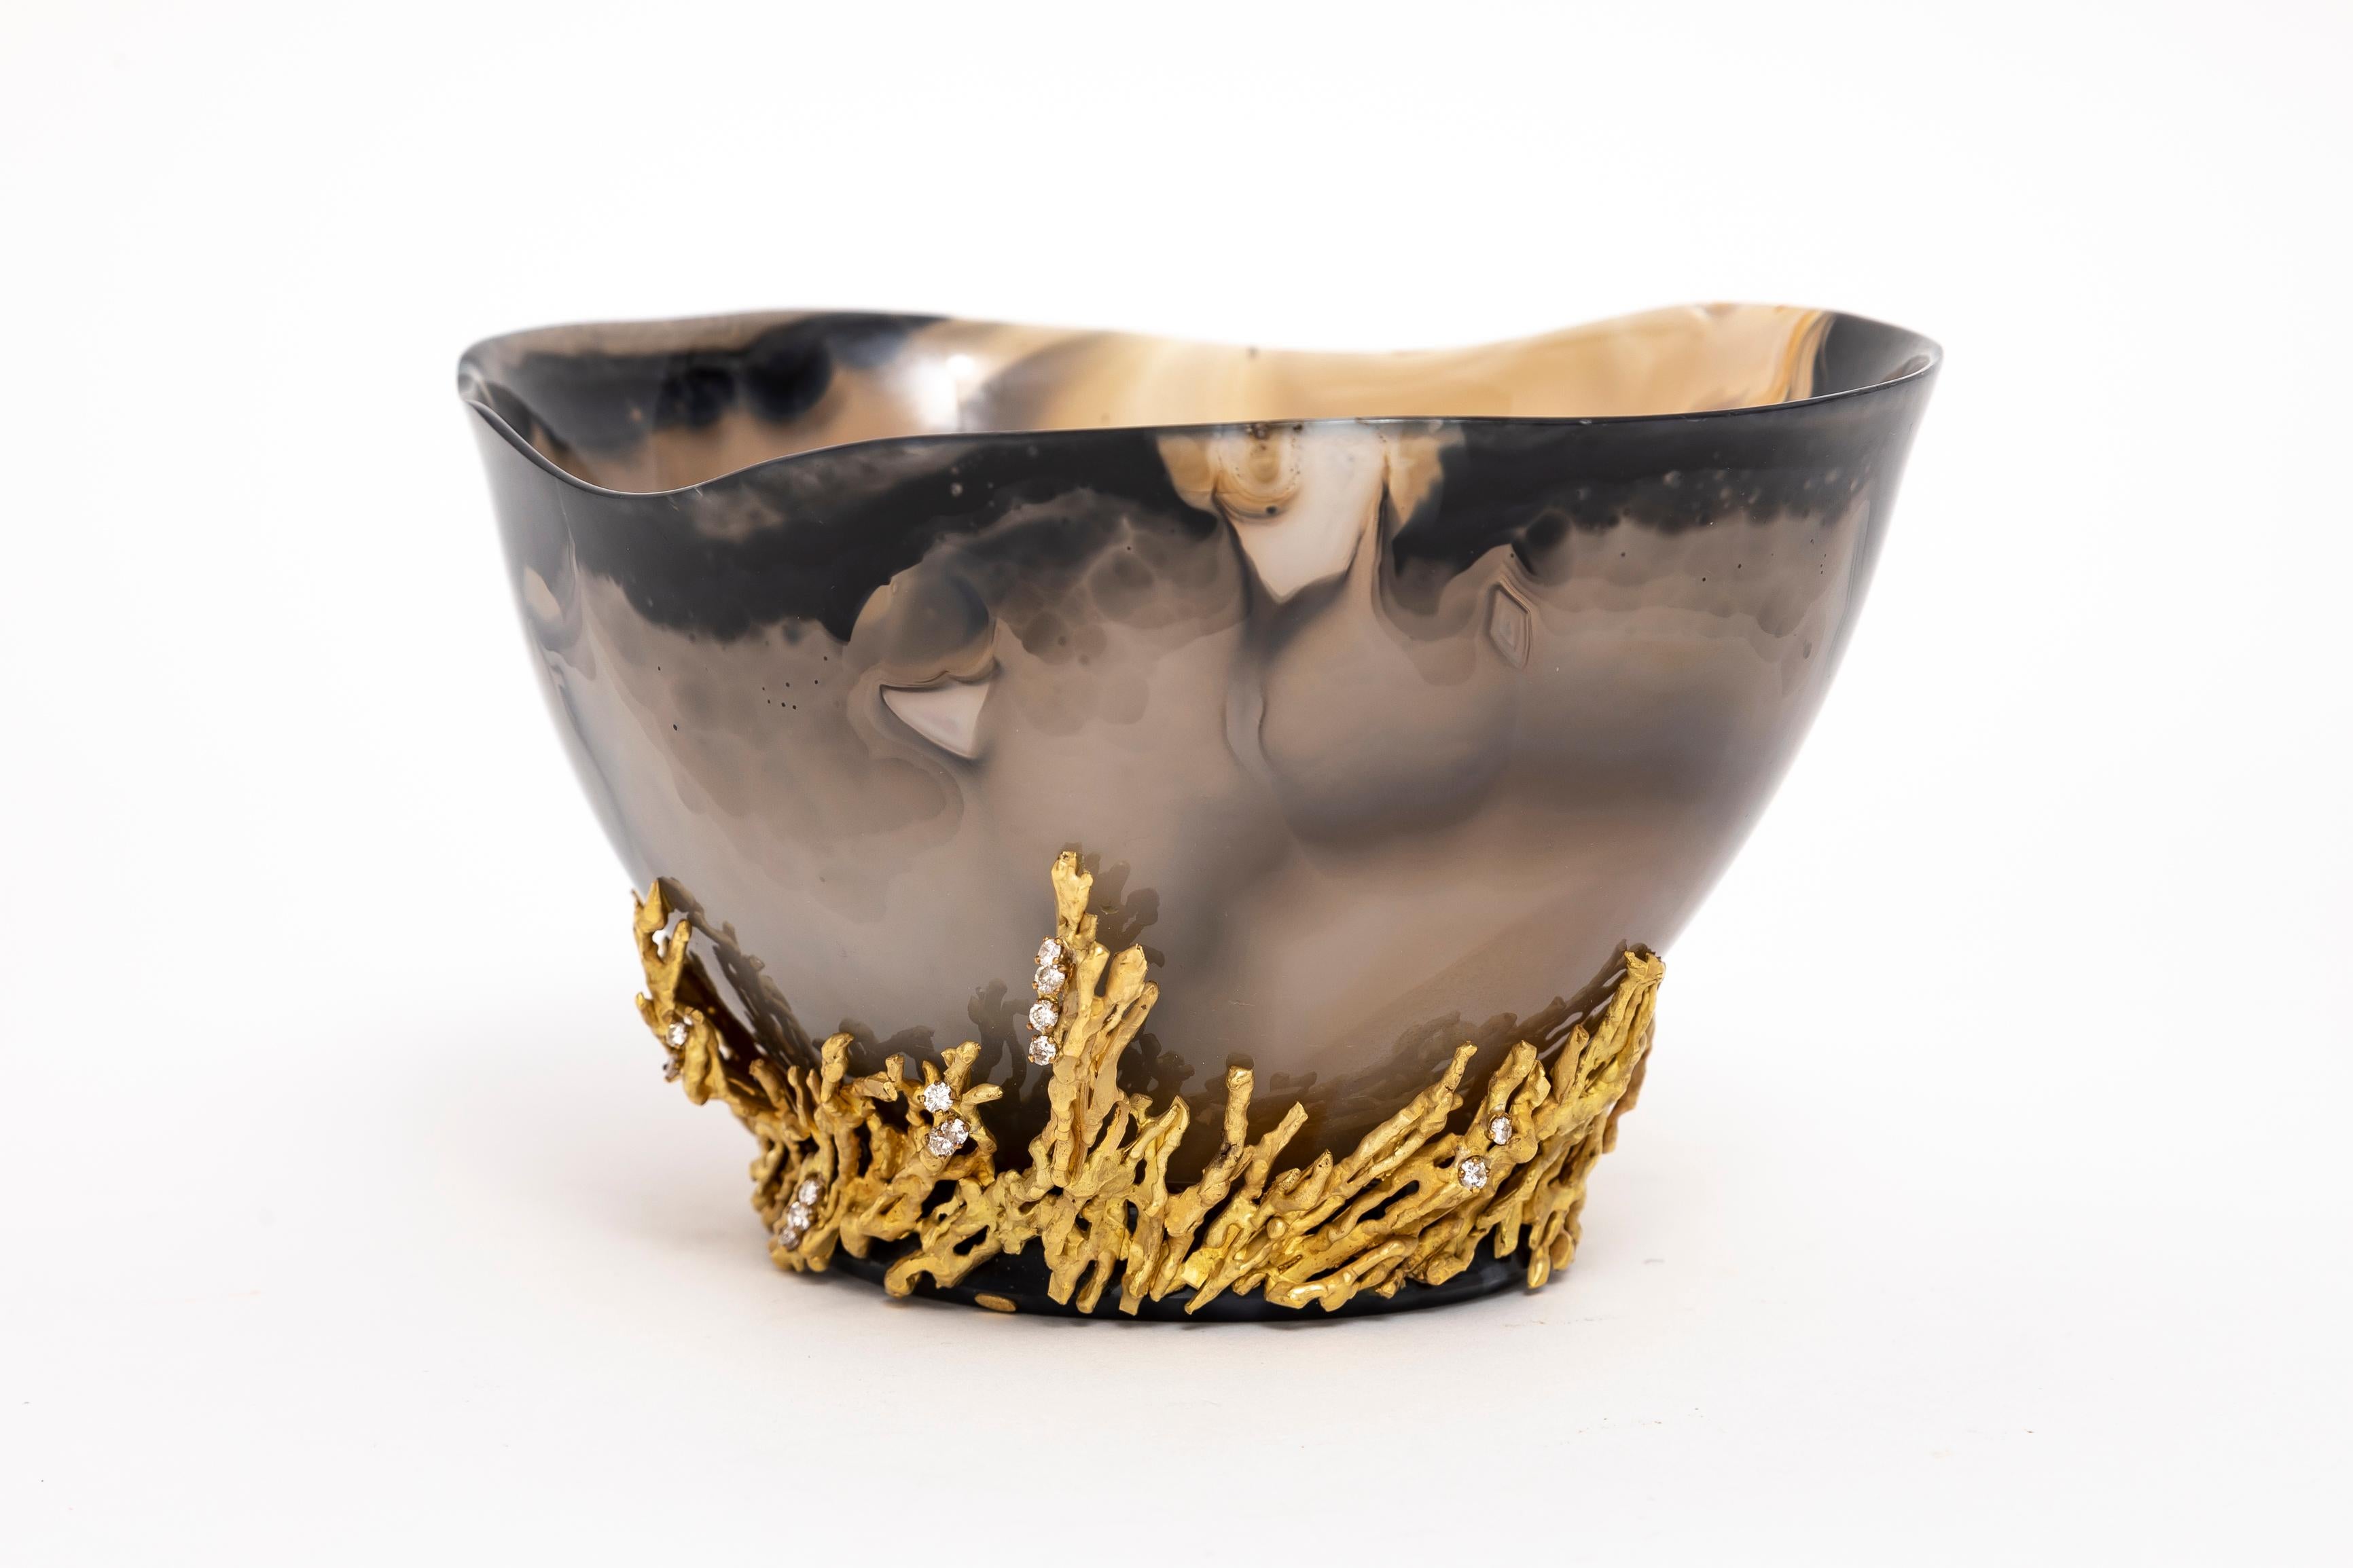 Mid-20th Century An Incredible Chaumet Paris Gold & Diamond Mounted Carved Agate Bowl For Sale